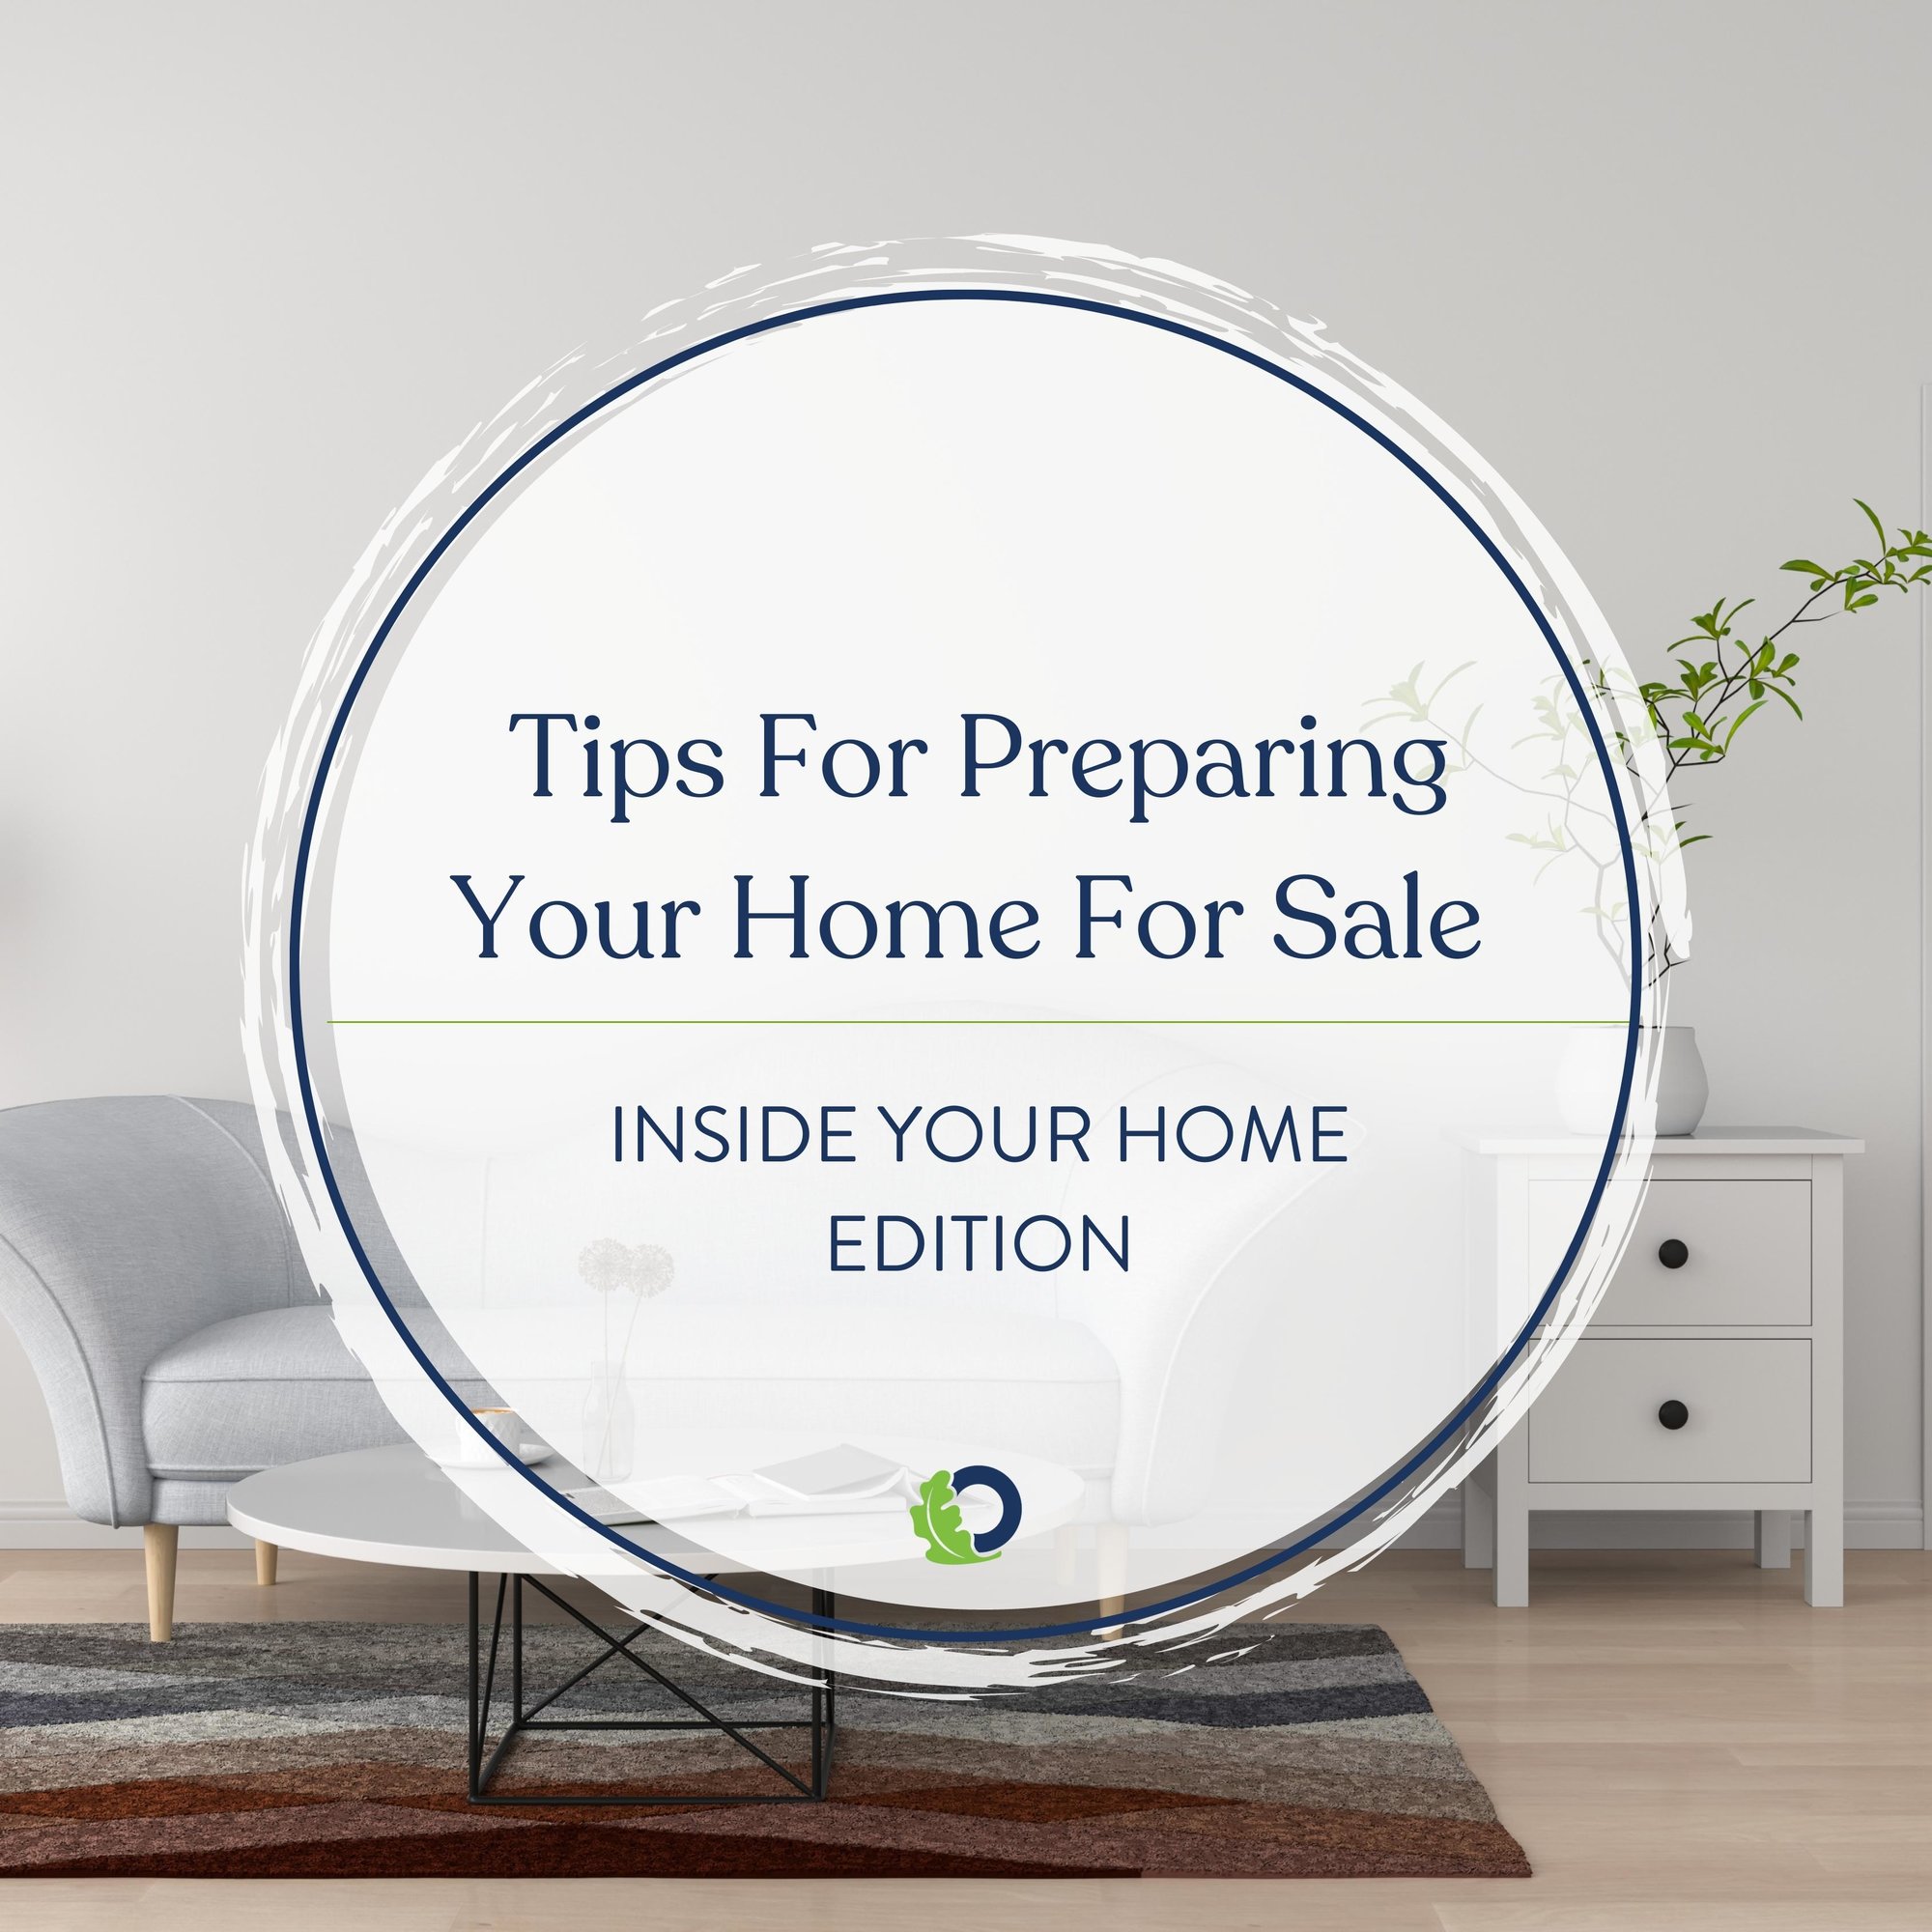 Tips For Preparing Your Home to Sell | Oakridge Real Esate